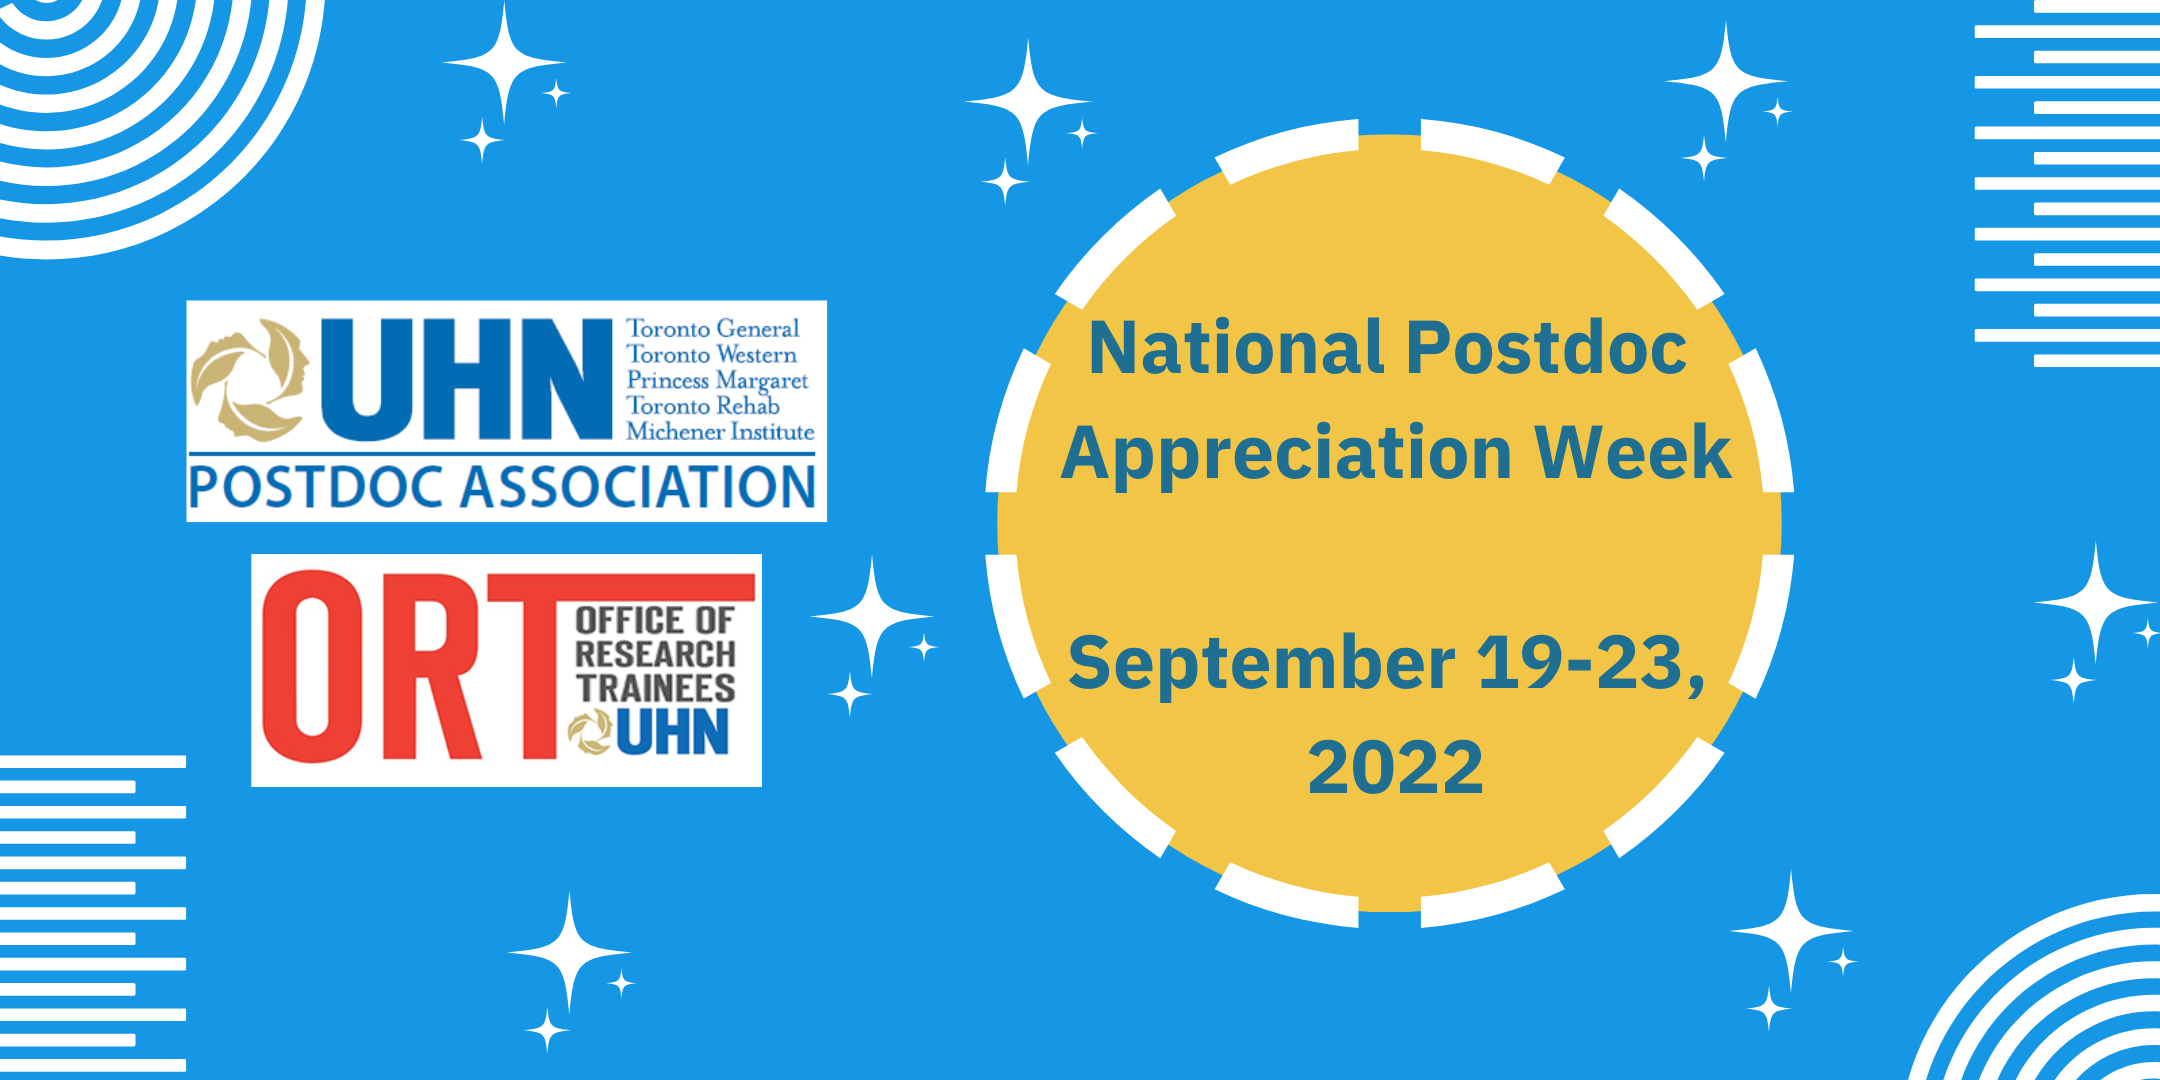 Light blue poster with white shapes. On the left is the UHN postdoc association logo and the ORT logo. On the right is a yellow circle that reads National Postdoc Appreciation Week. September 19-23, 2022